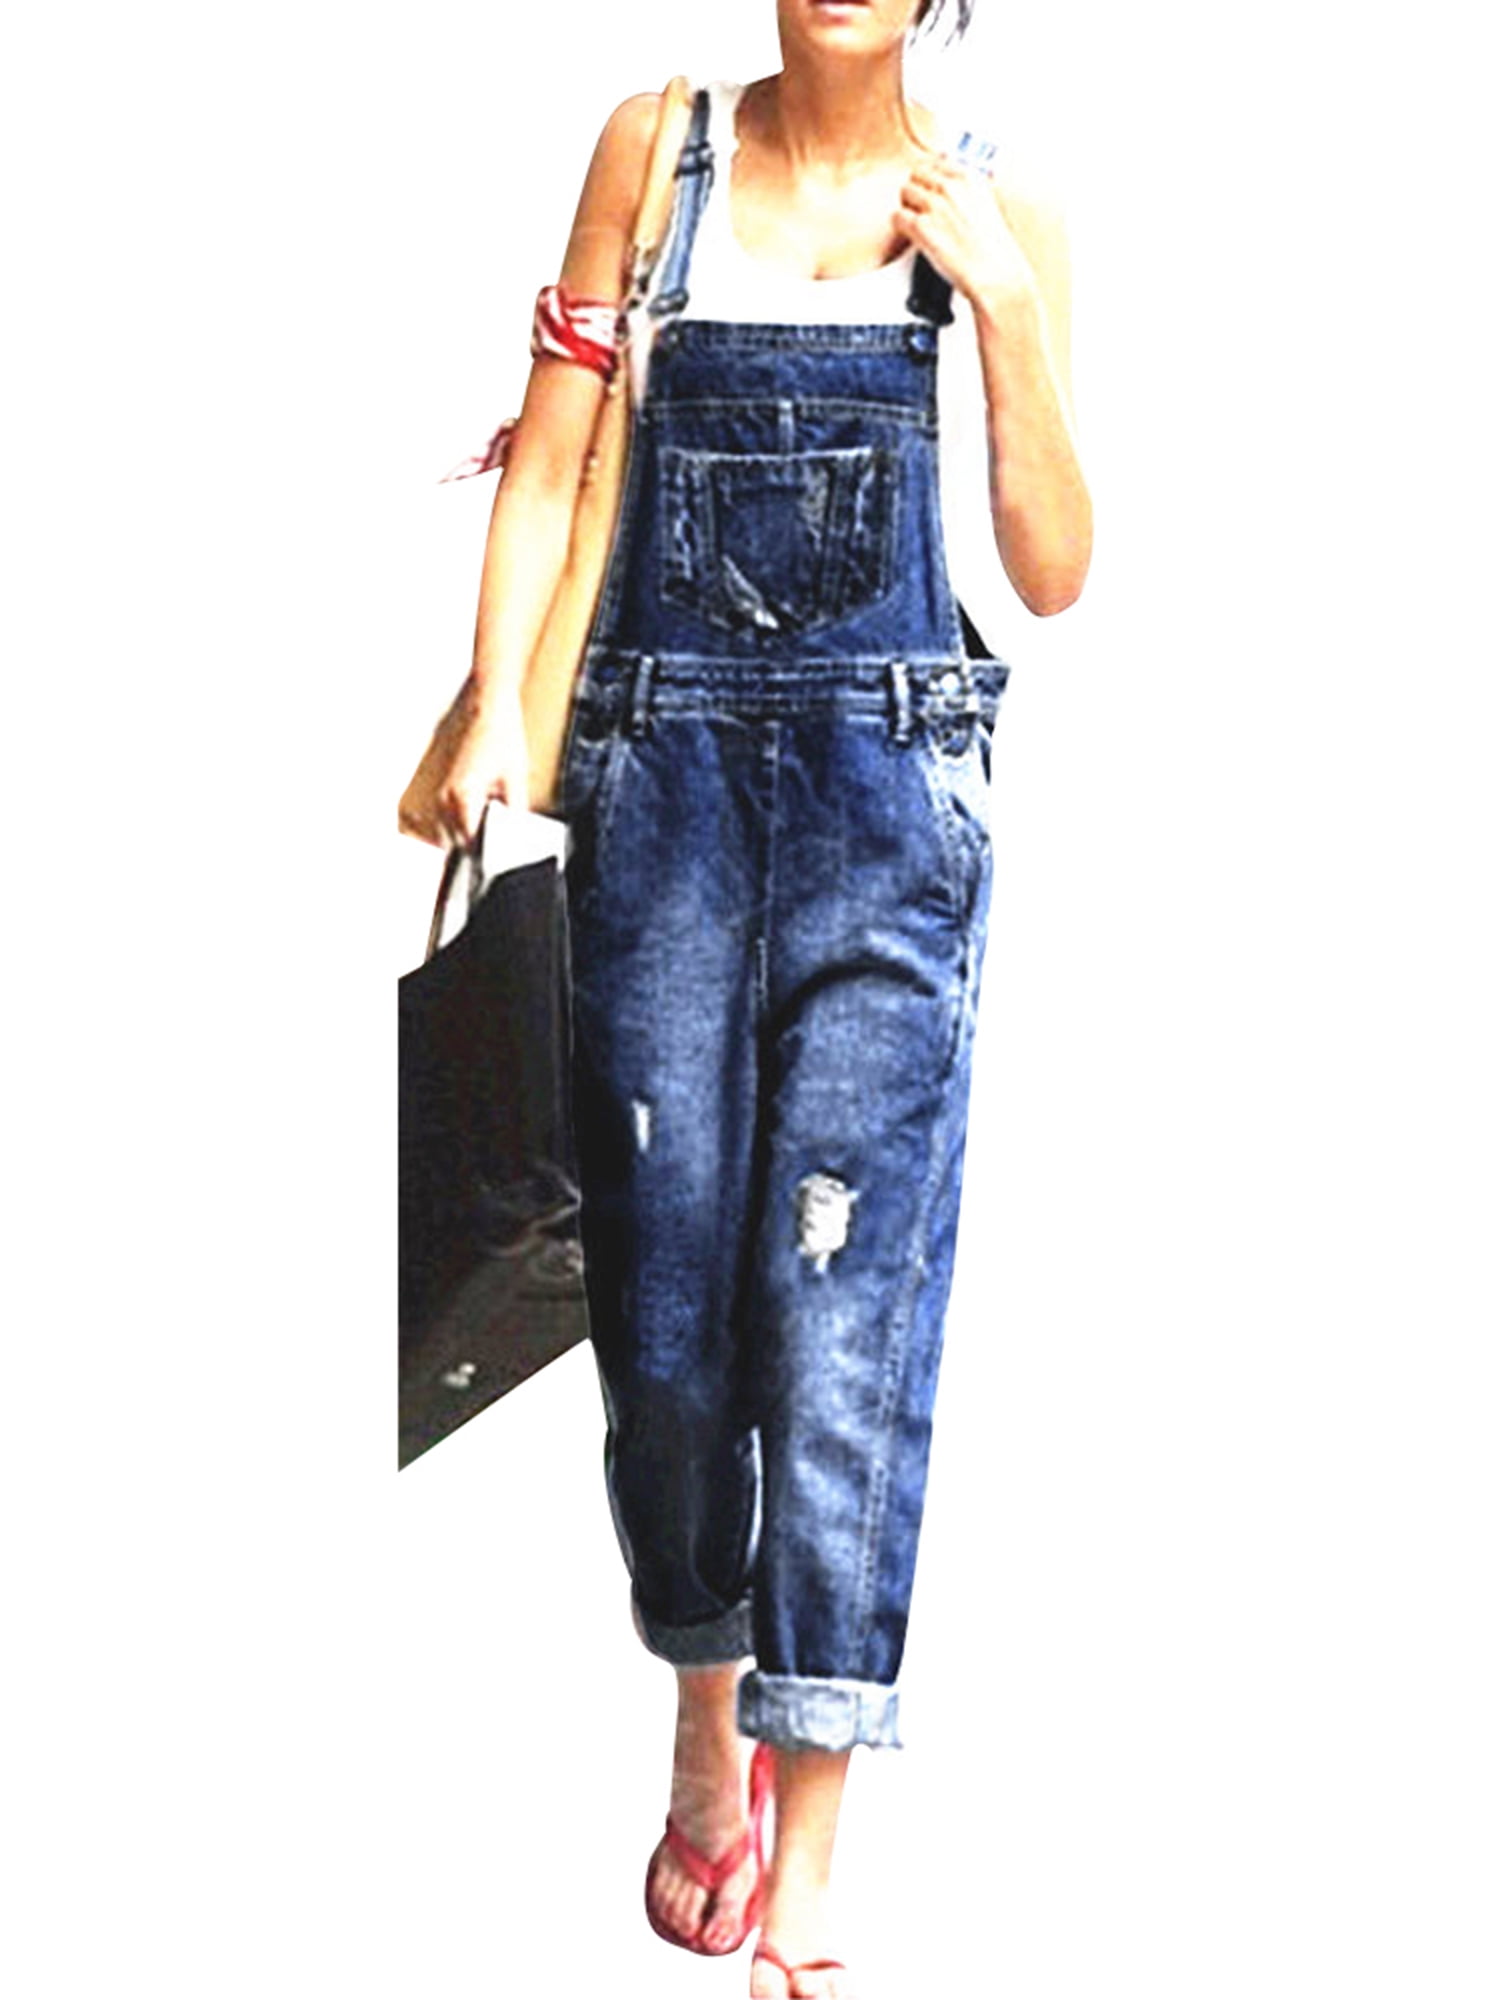 Womens Dungarees Ladies Loose Fit Casual Baggy Denim Bib Jeans Overalls Ripped Denim Jumpsuits Rompers Full Length Pants Trouser with Pockets 